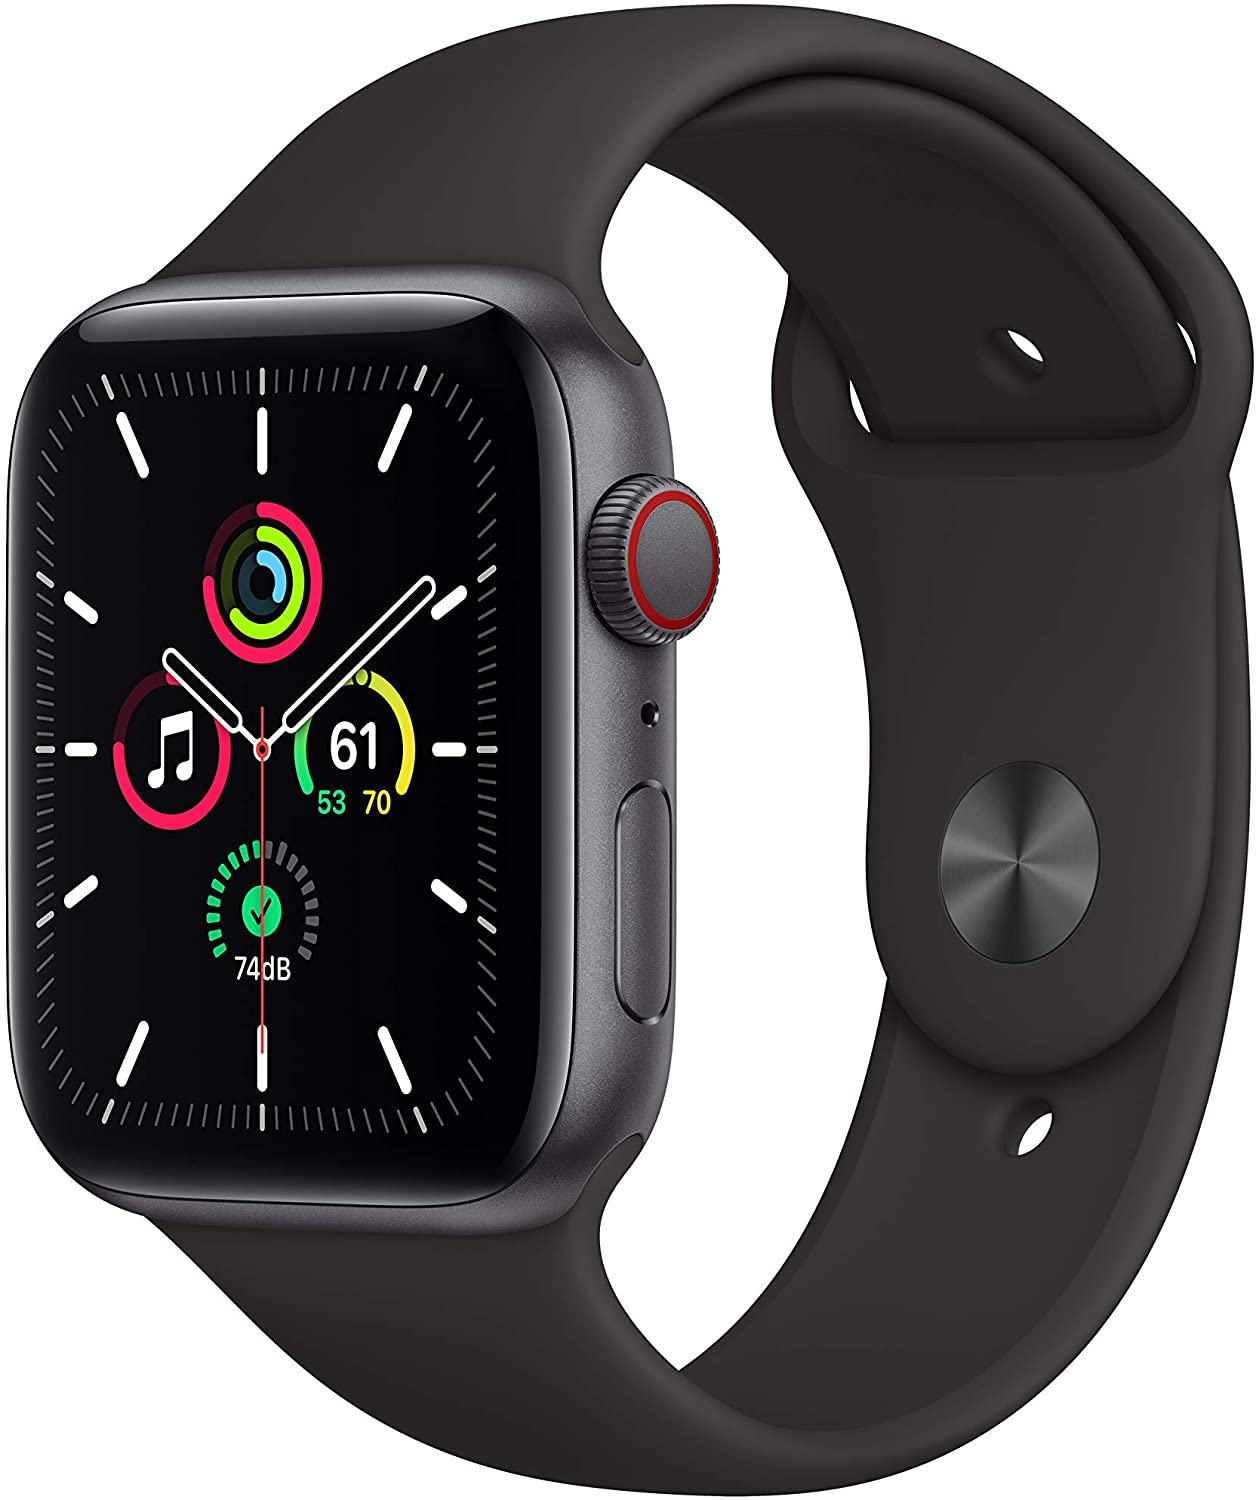 Apple Watch Series 3 Gps Only Features Cheap Sale, 53% OFF | www 